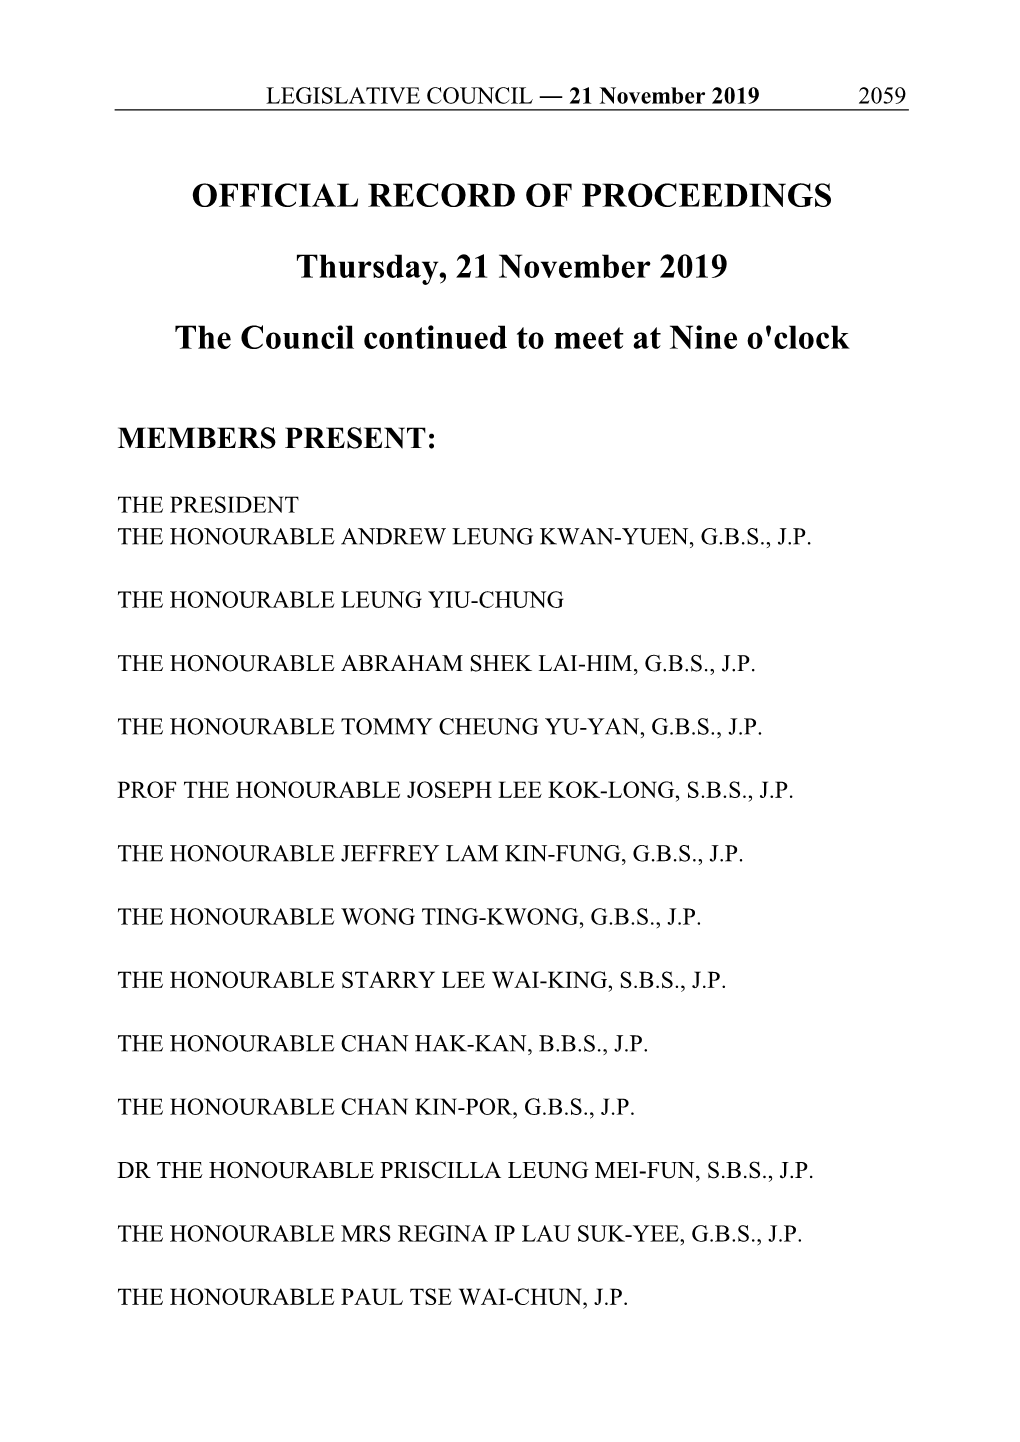 OFFICIAL RECORD of PROCEEDINGS Thursday, 21